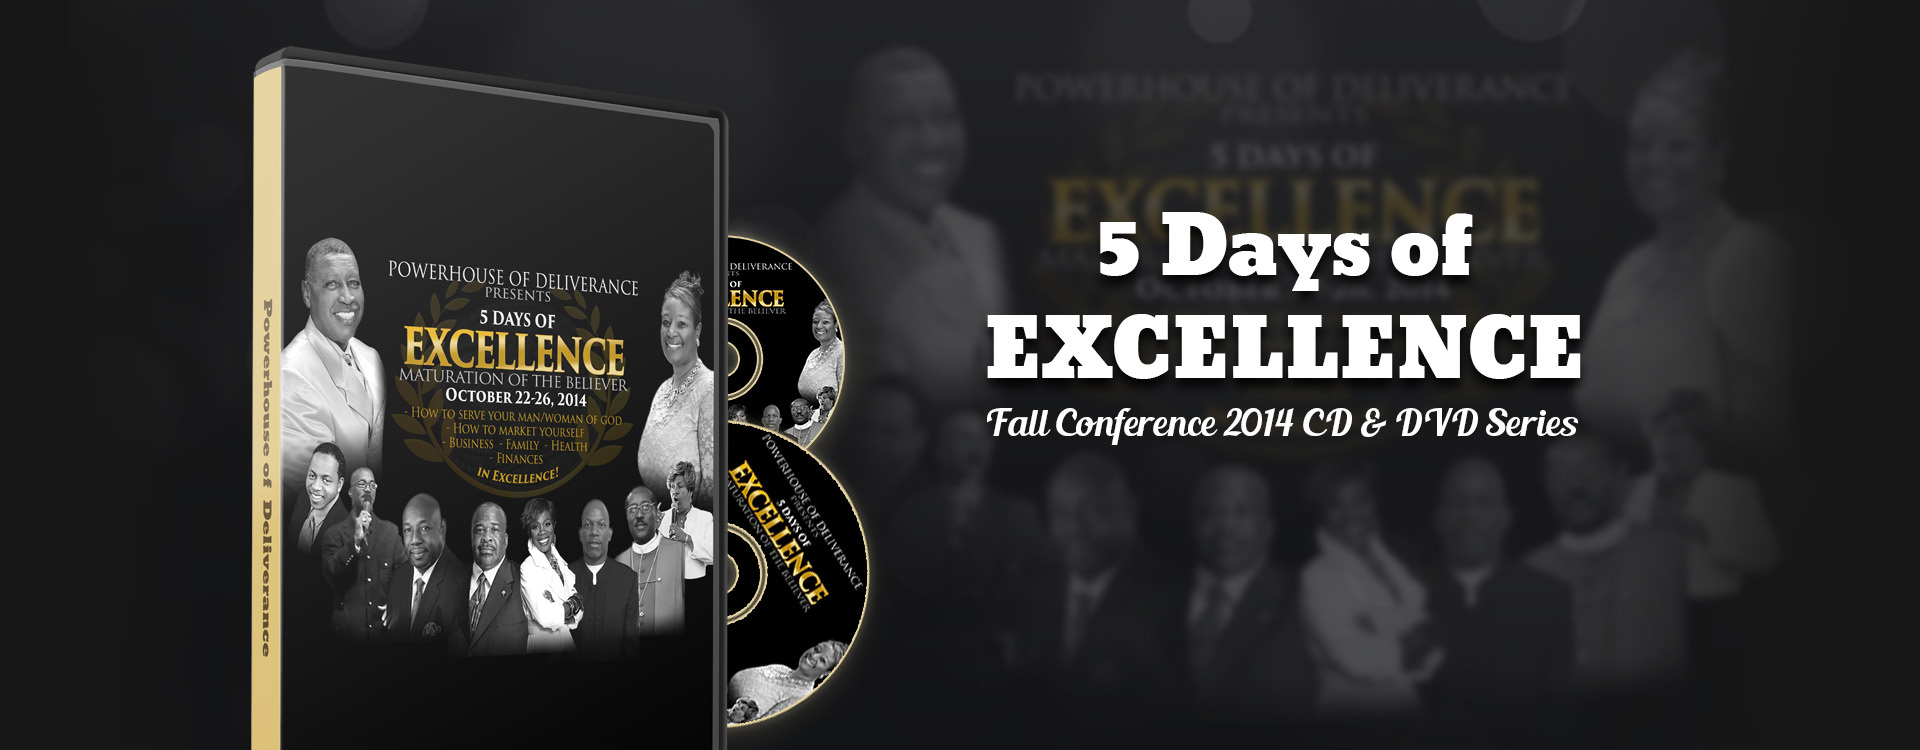 5-days-of-excellence-fall-of-conference-of-2014